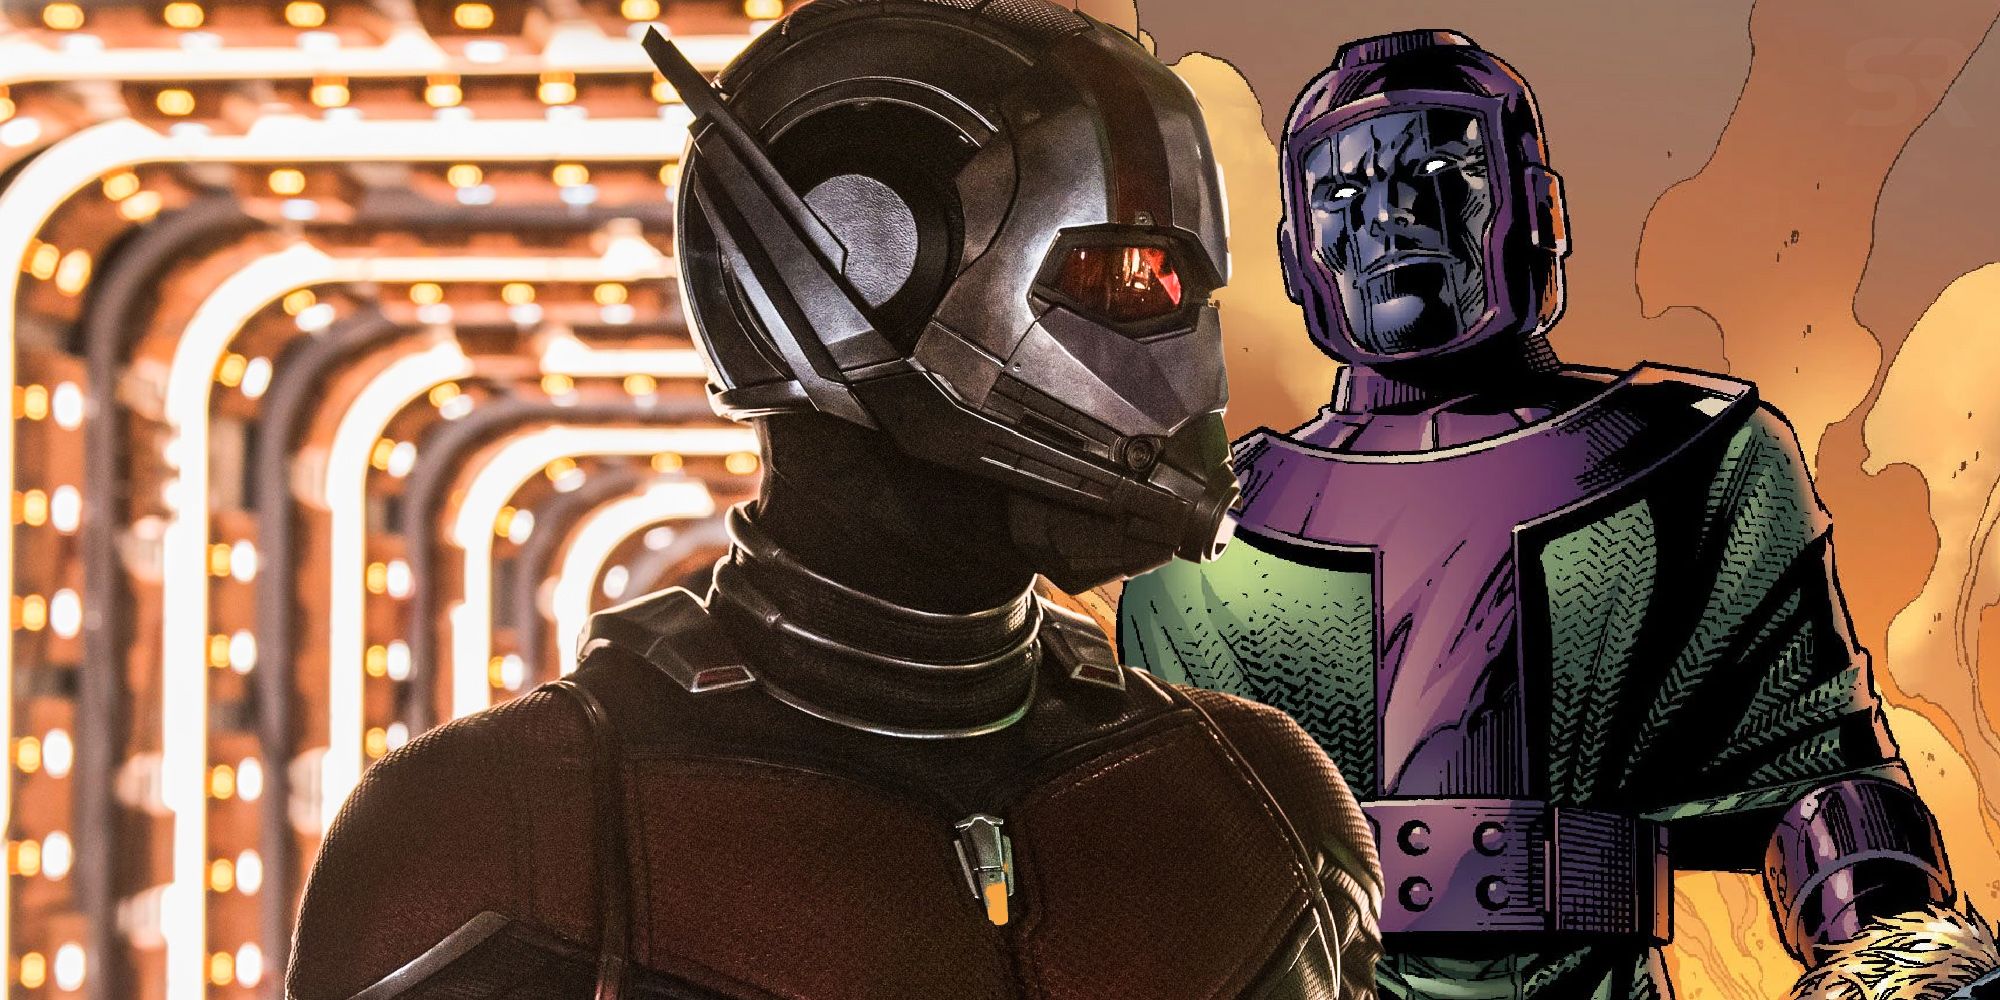 Jonathan Majors joins Marvel's Ant-Man 3, reportedly as Kang the Conqueror